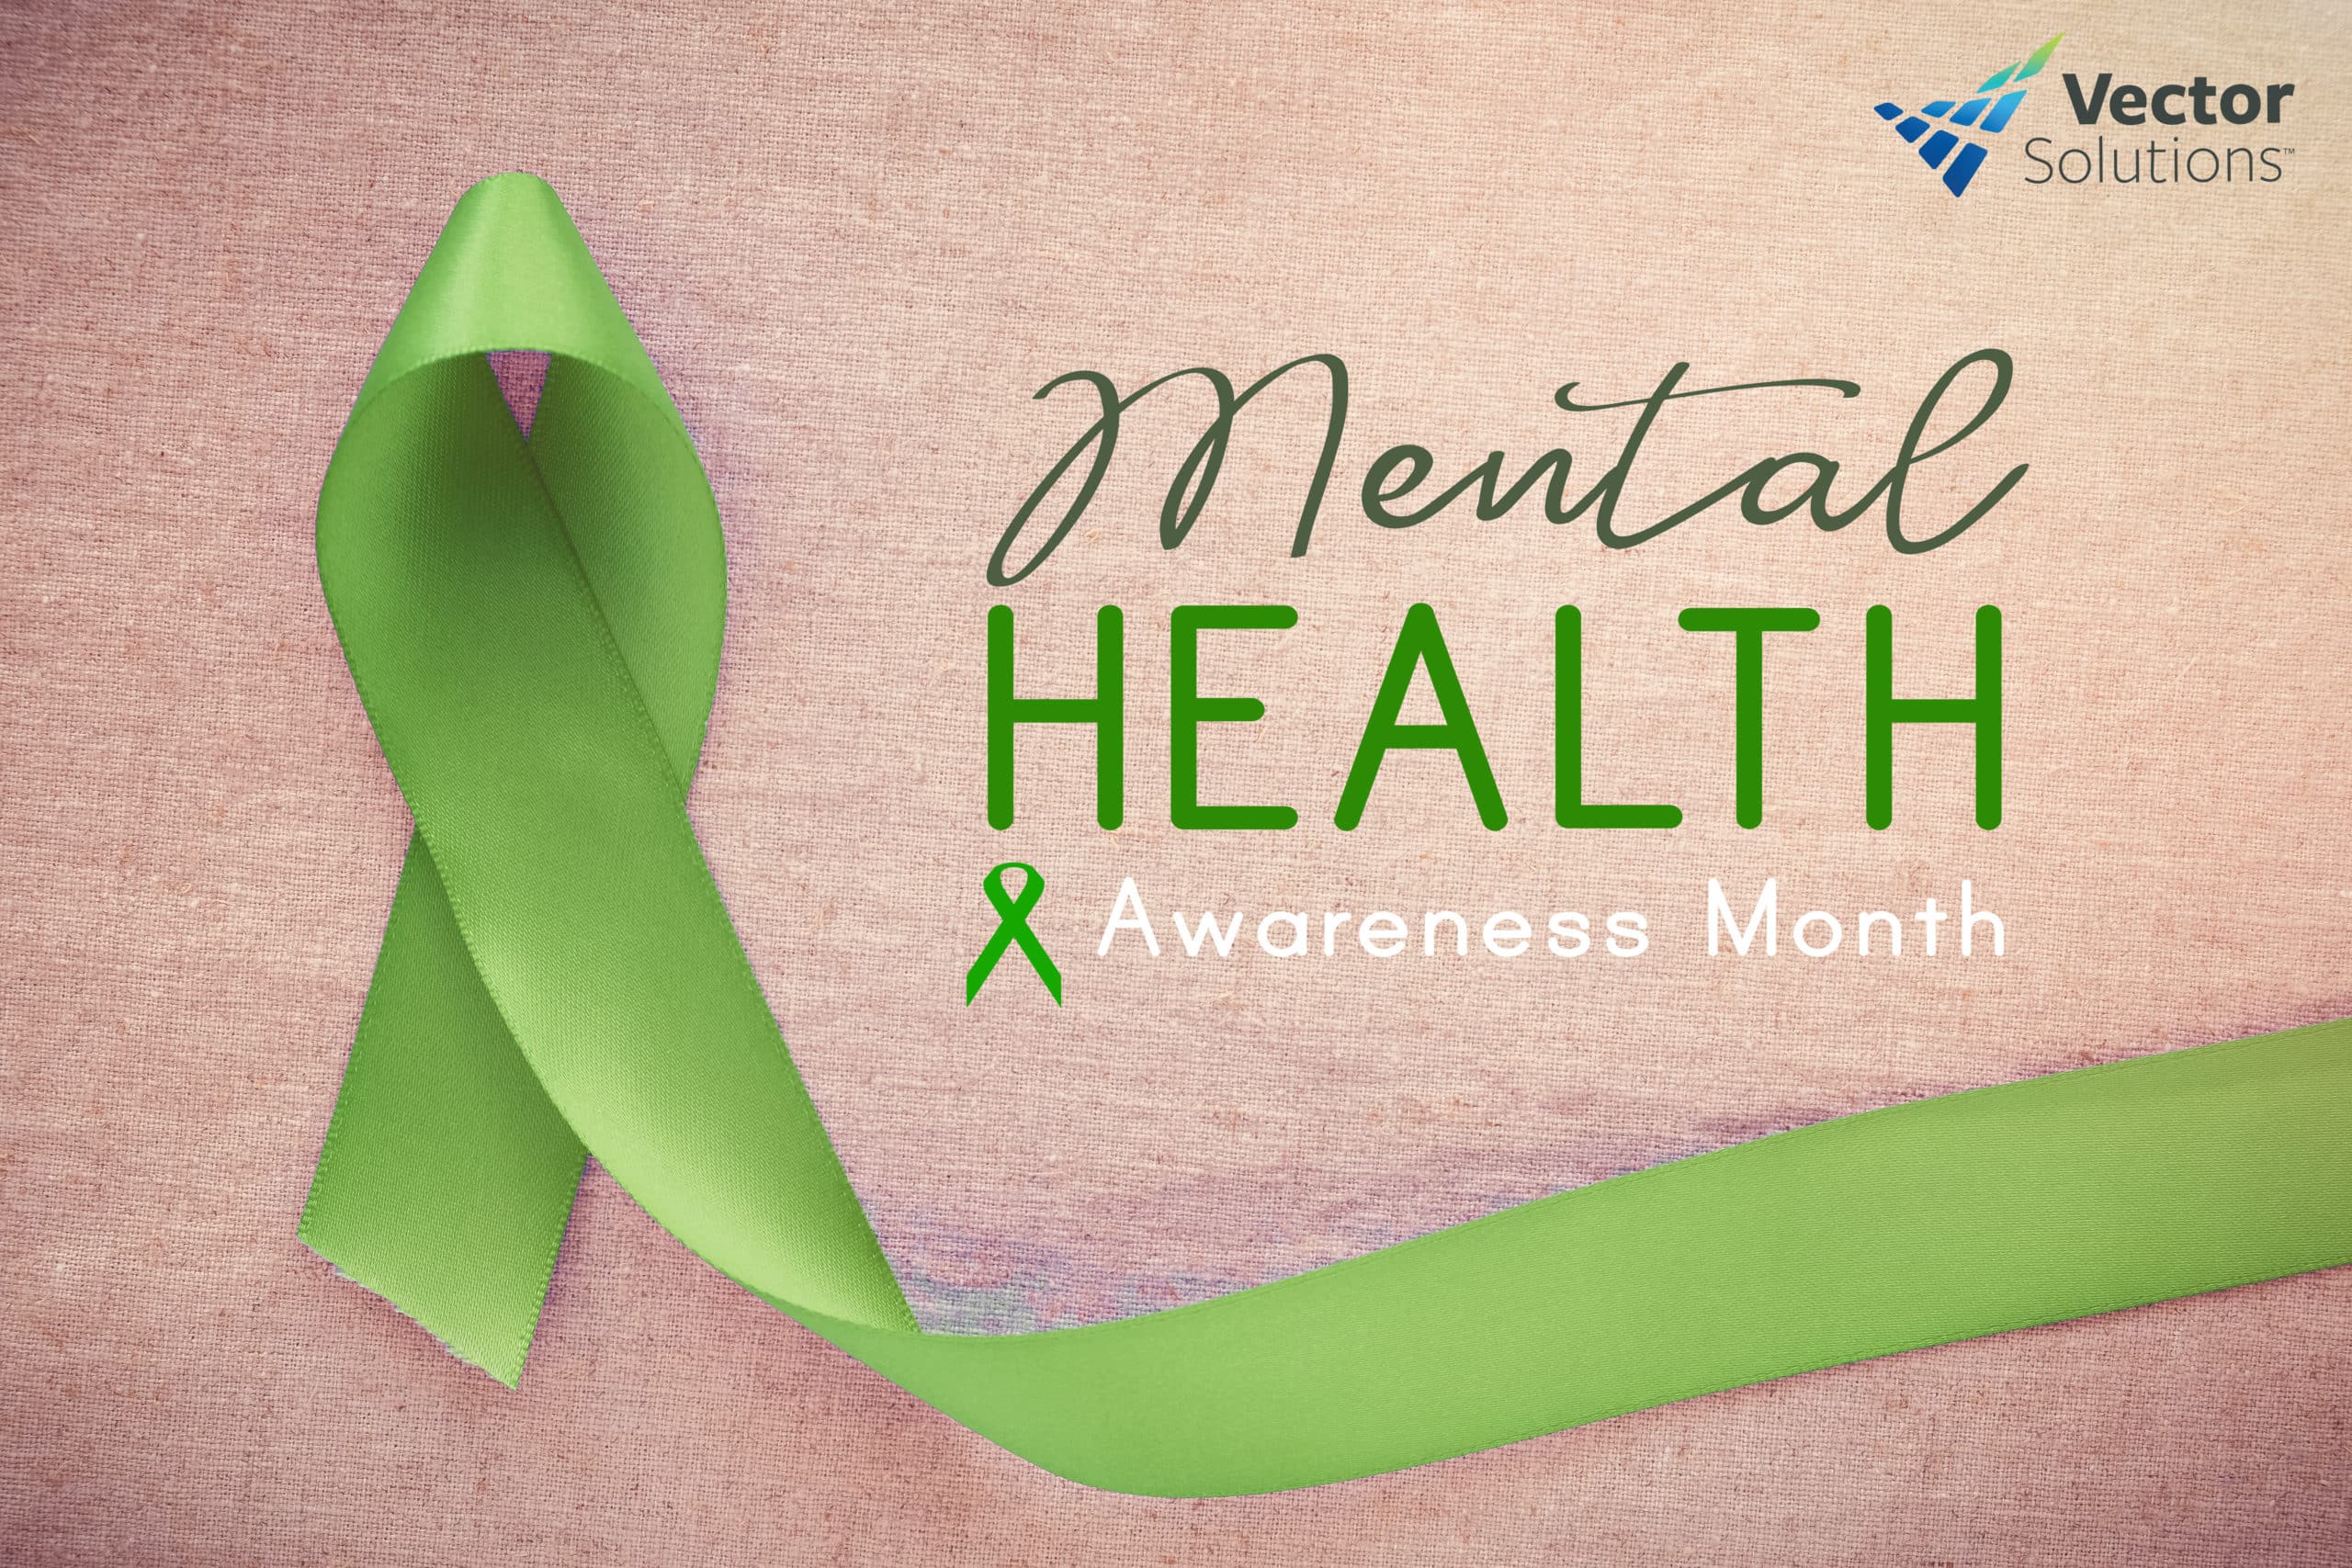 Vector Solutions Recognizes Mental Health Awareness Month